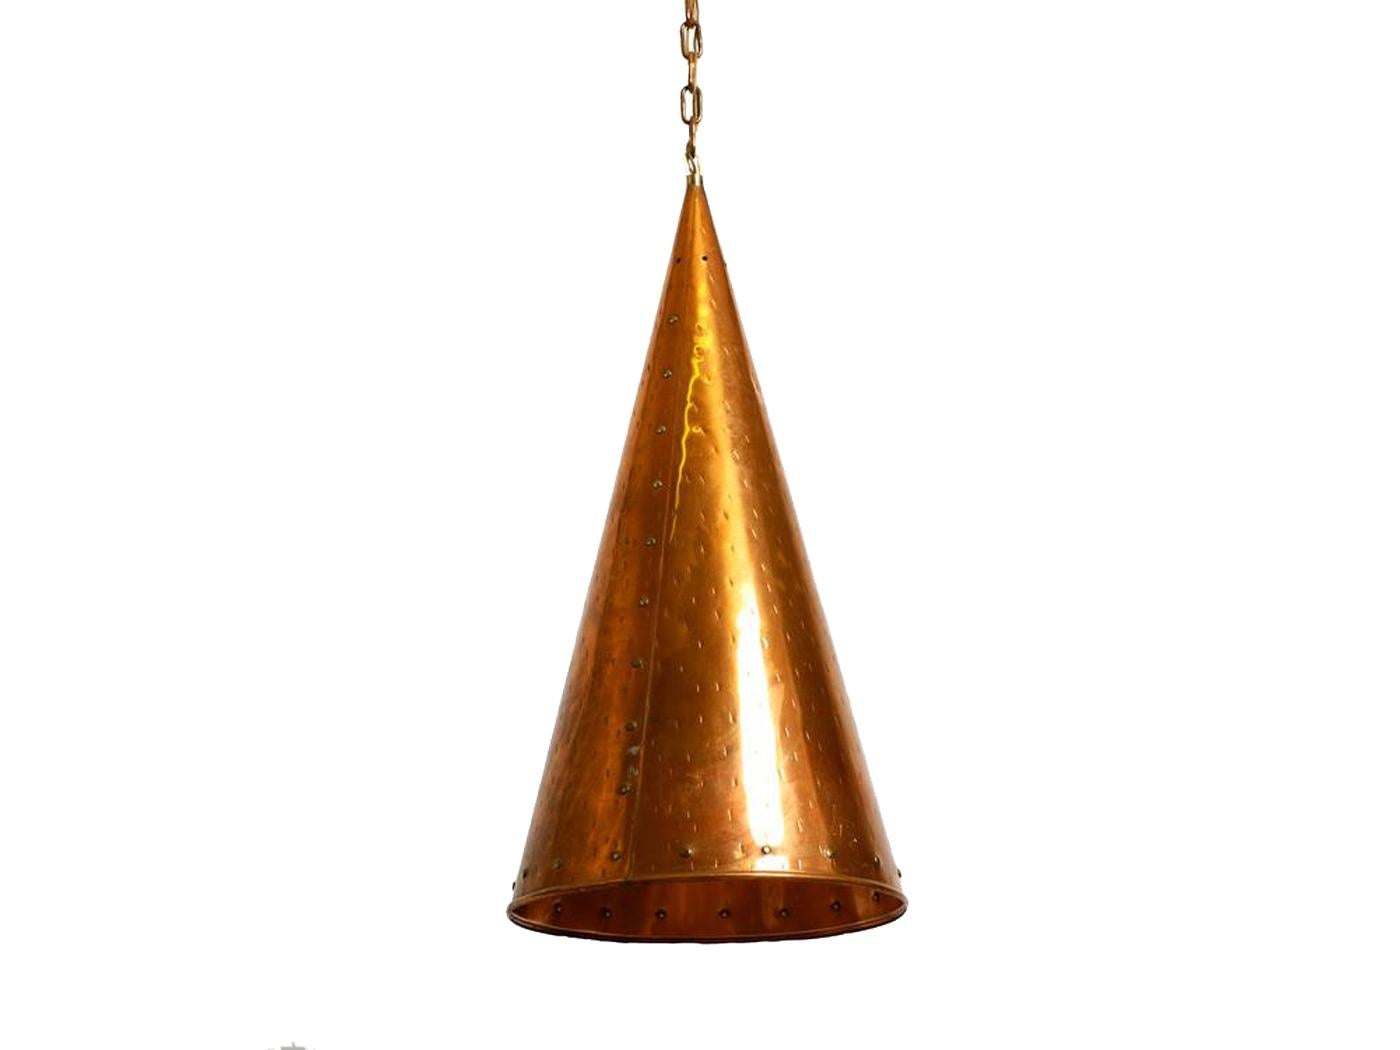 Large Copper Cone Pendant Lamp from Th Valentiner Copenhagen, Denmark, 1960s. Minimalist design in the shape of a cone. 
Very good vintage condition, no damages to the lamp. Patina with very minor signs of wear. 100% original condition. With